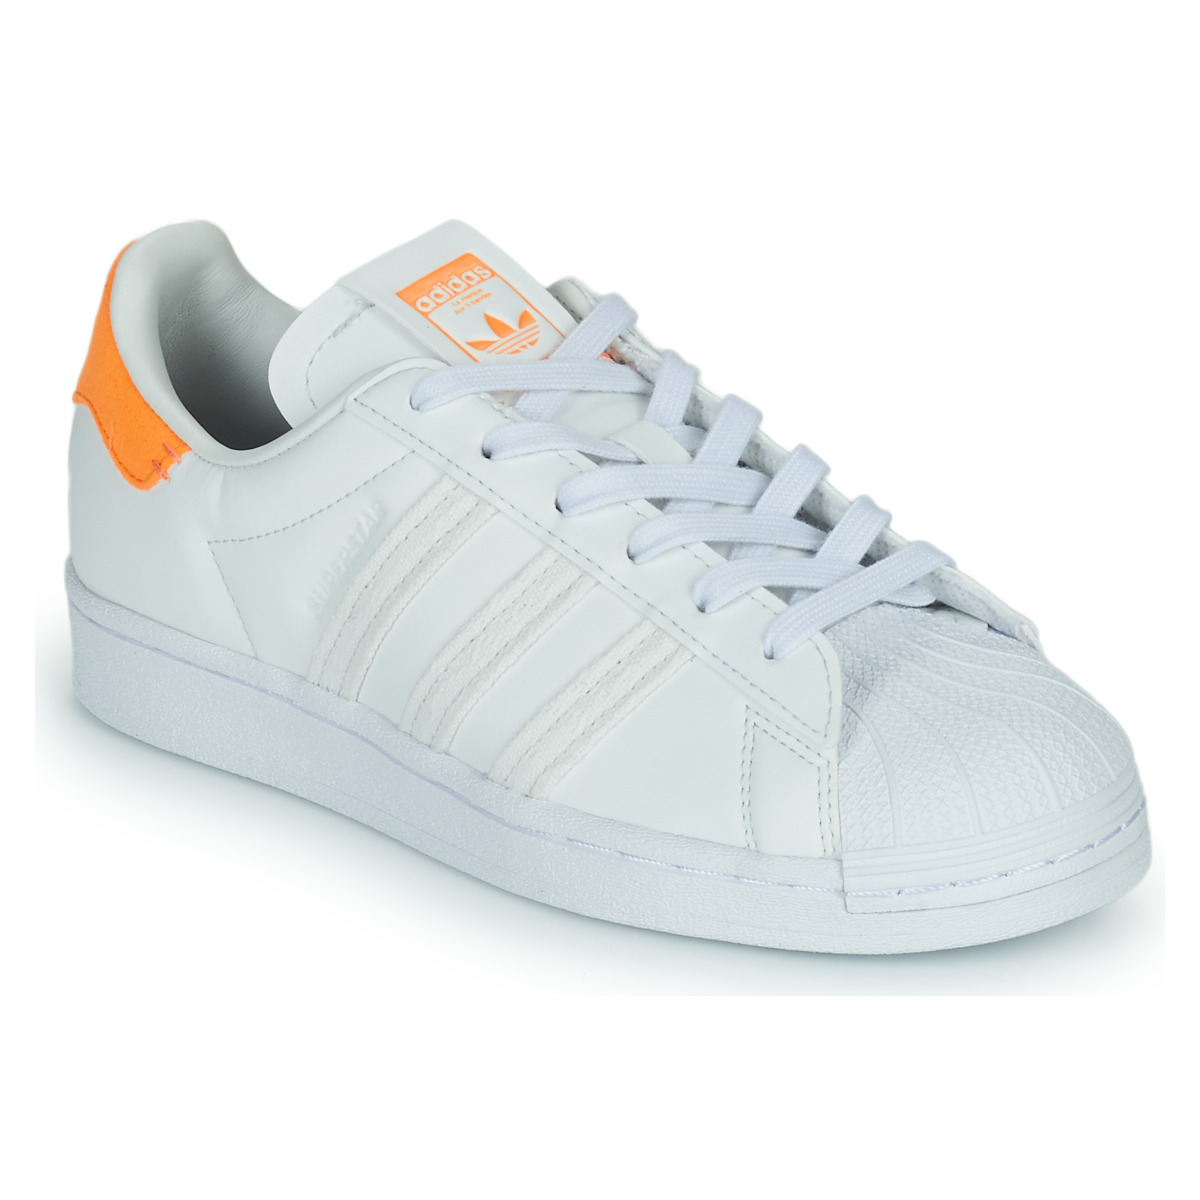 Originals White delivery trainers / Women adidas Low - top Shoes W Orange | ! SUPERSTAR Free NET Spartoo -